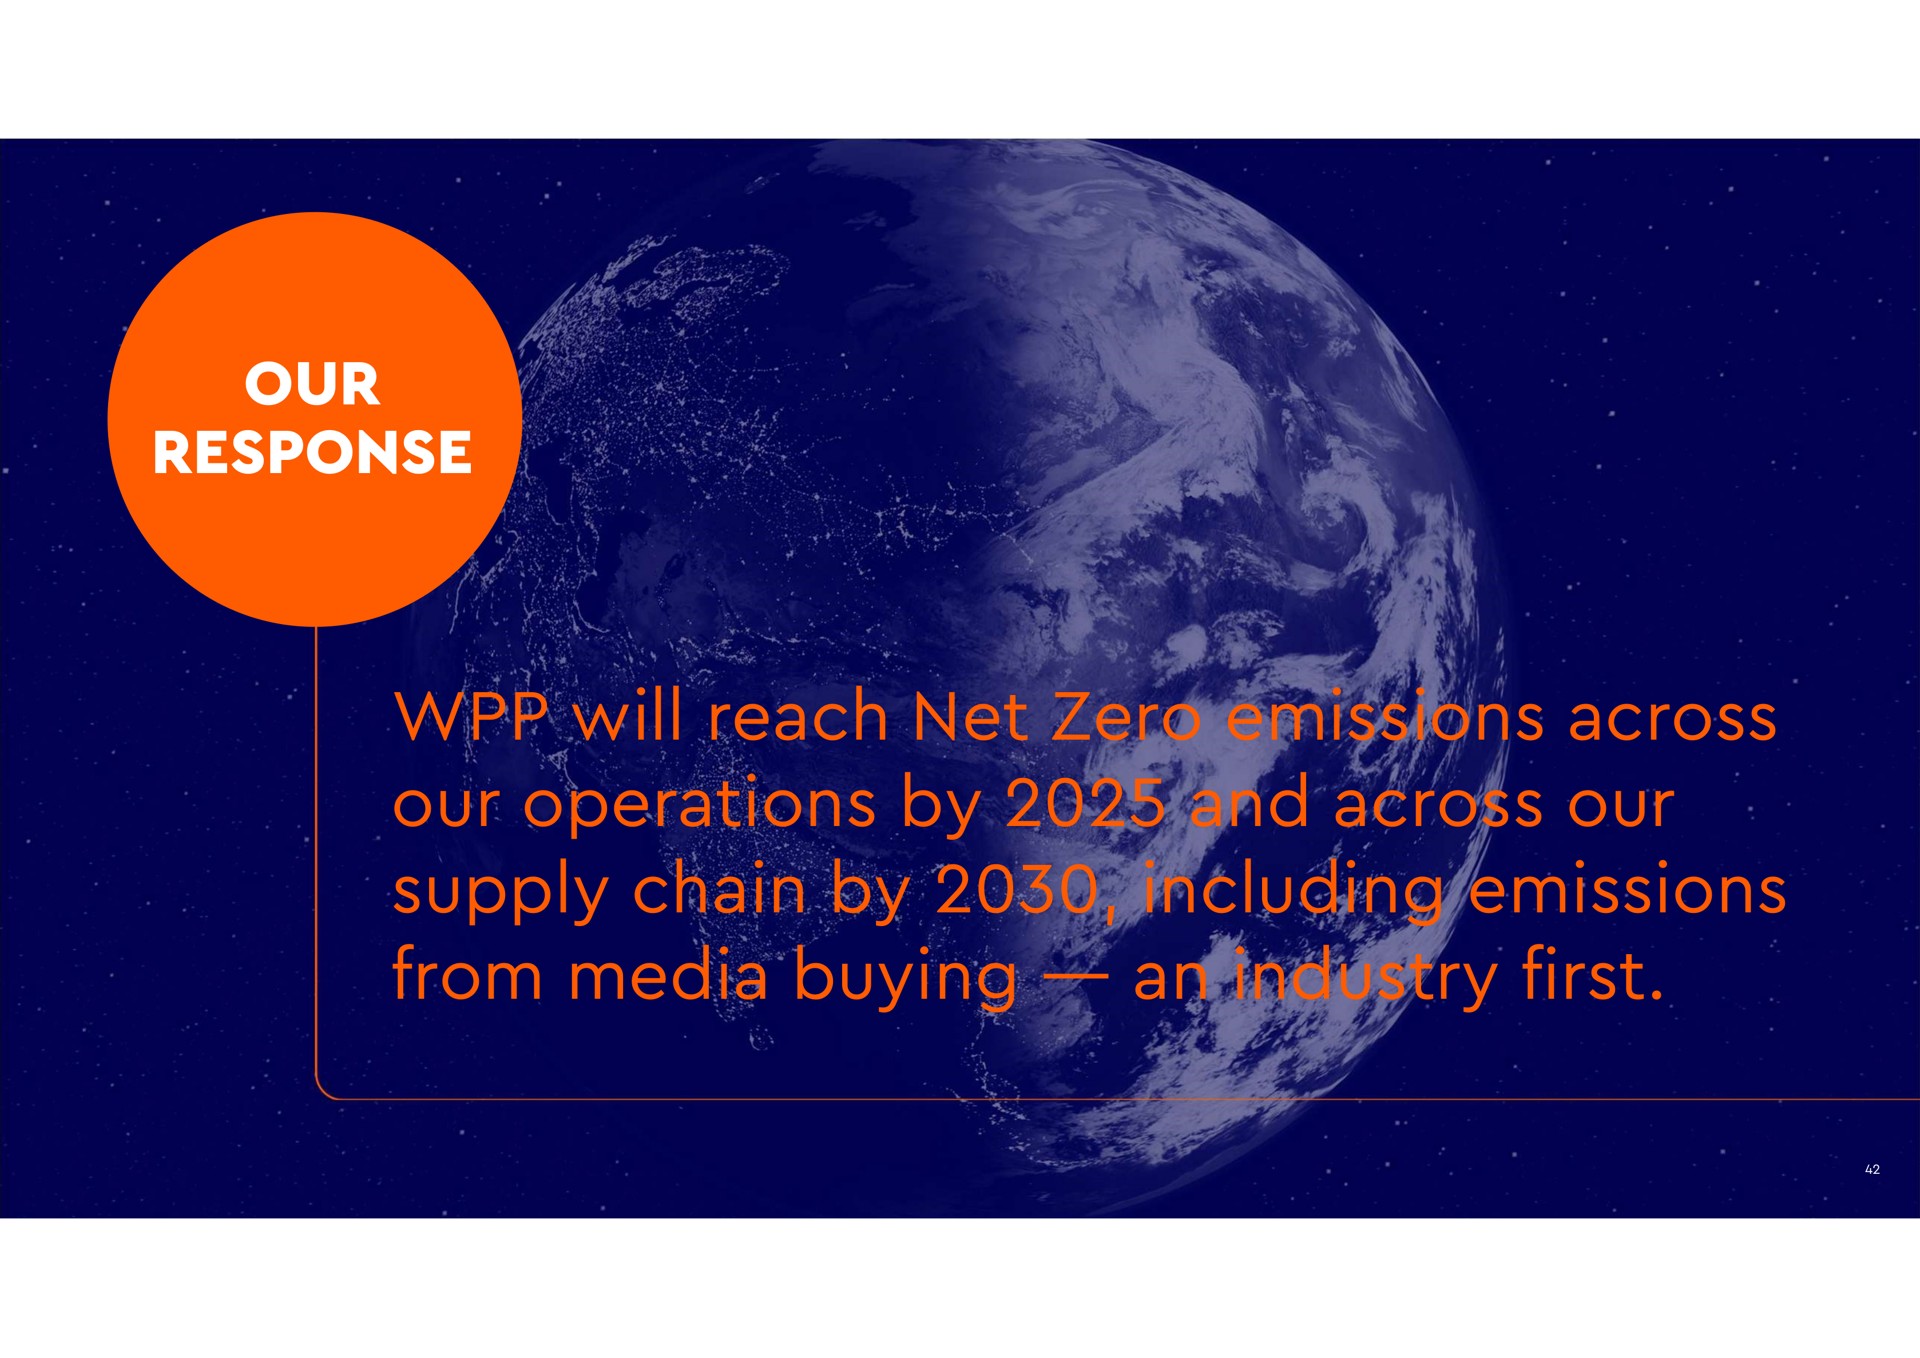 will reach net zero emissions across our operations by and across our supply chain by including emissions from media buying an industry first response | WPP